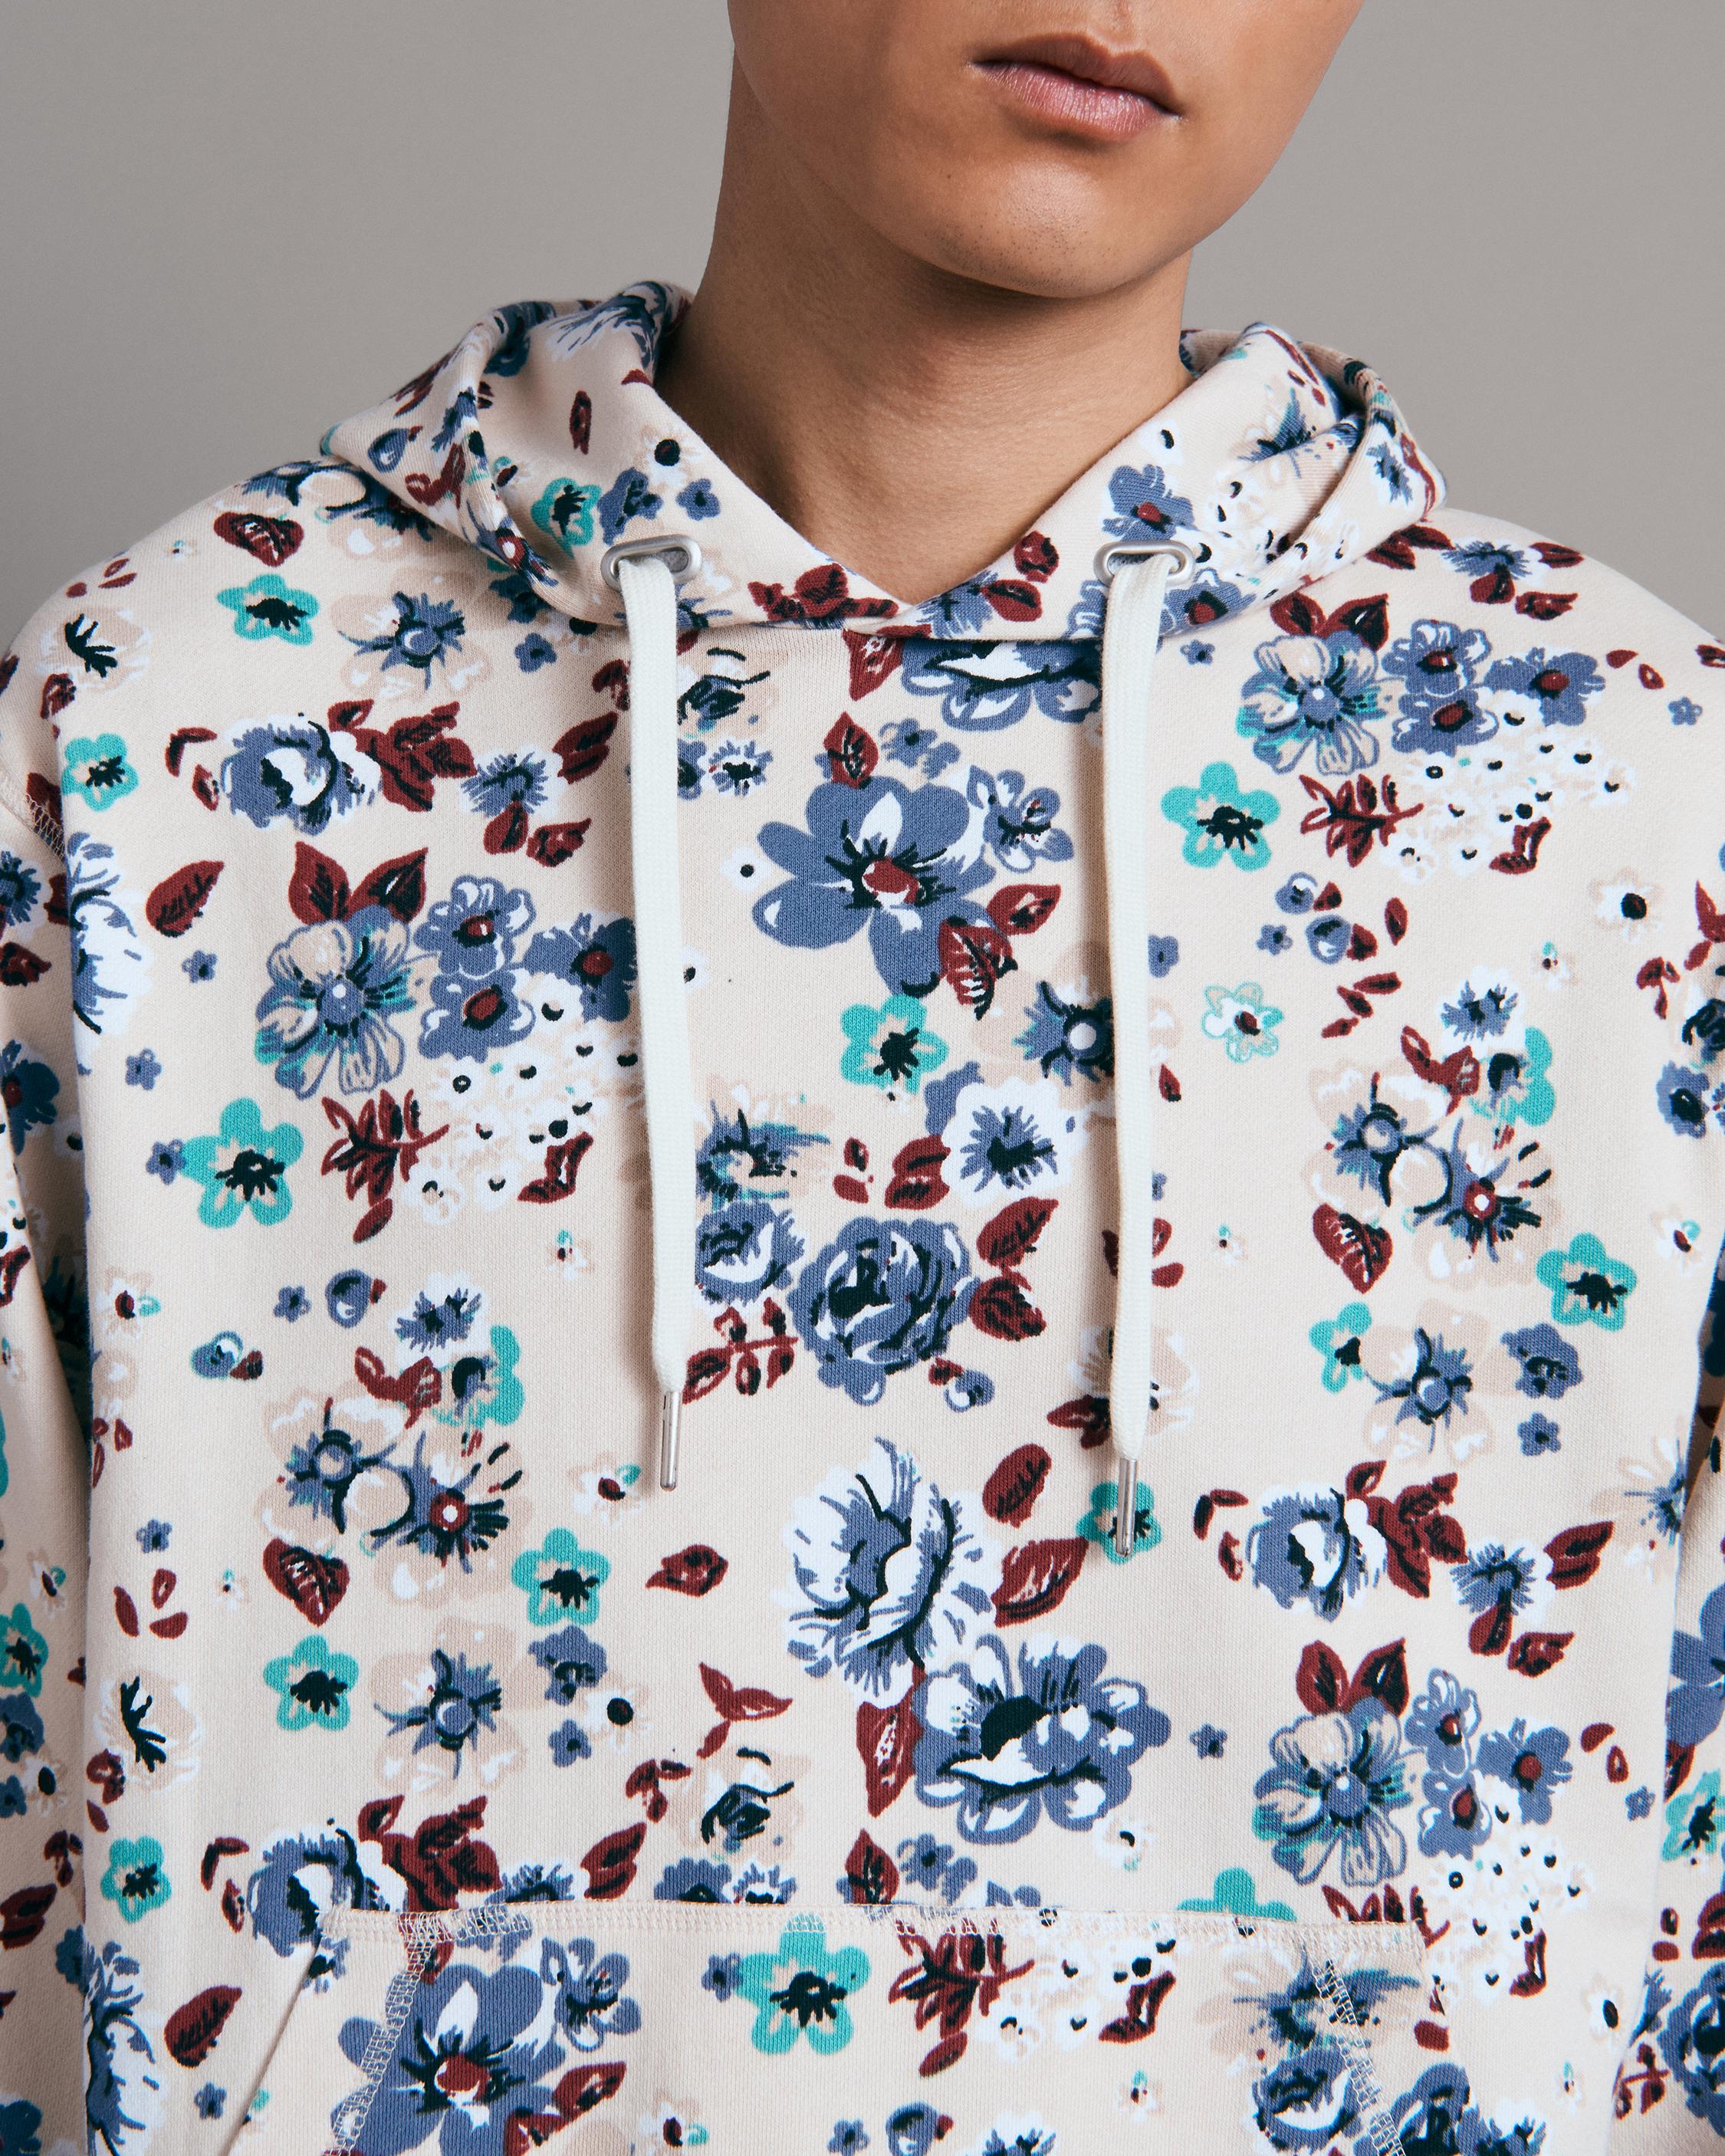 All Over Floral Print Hoodie